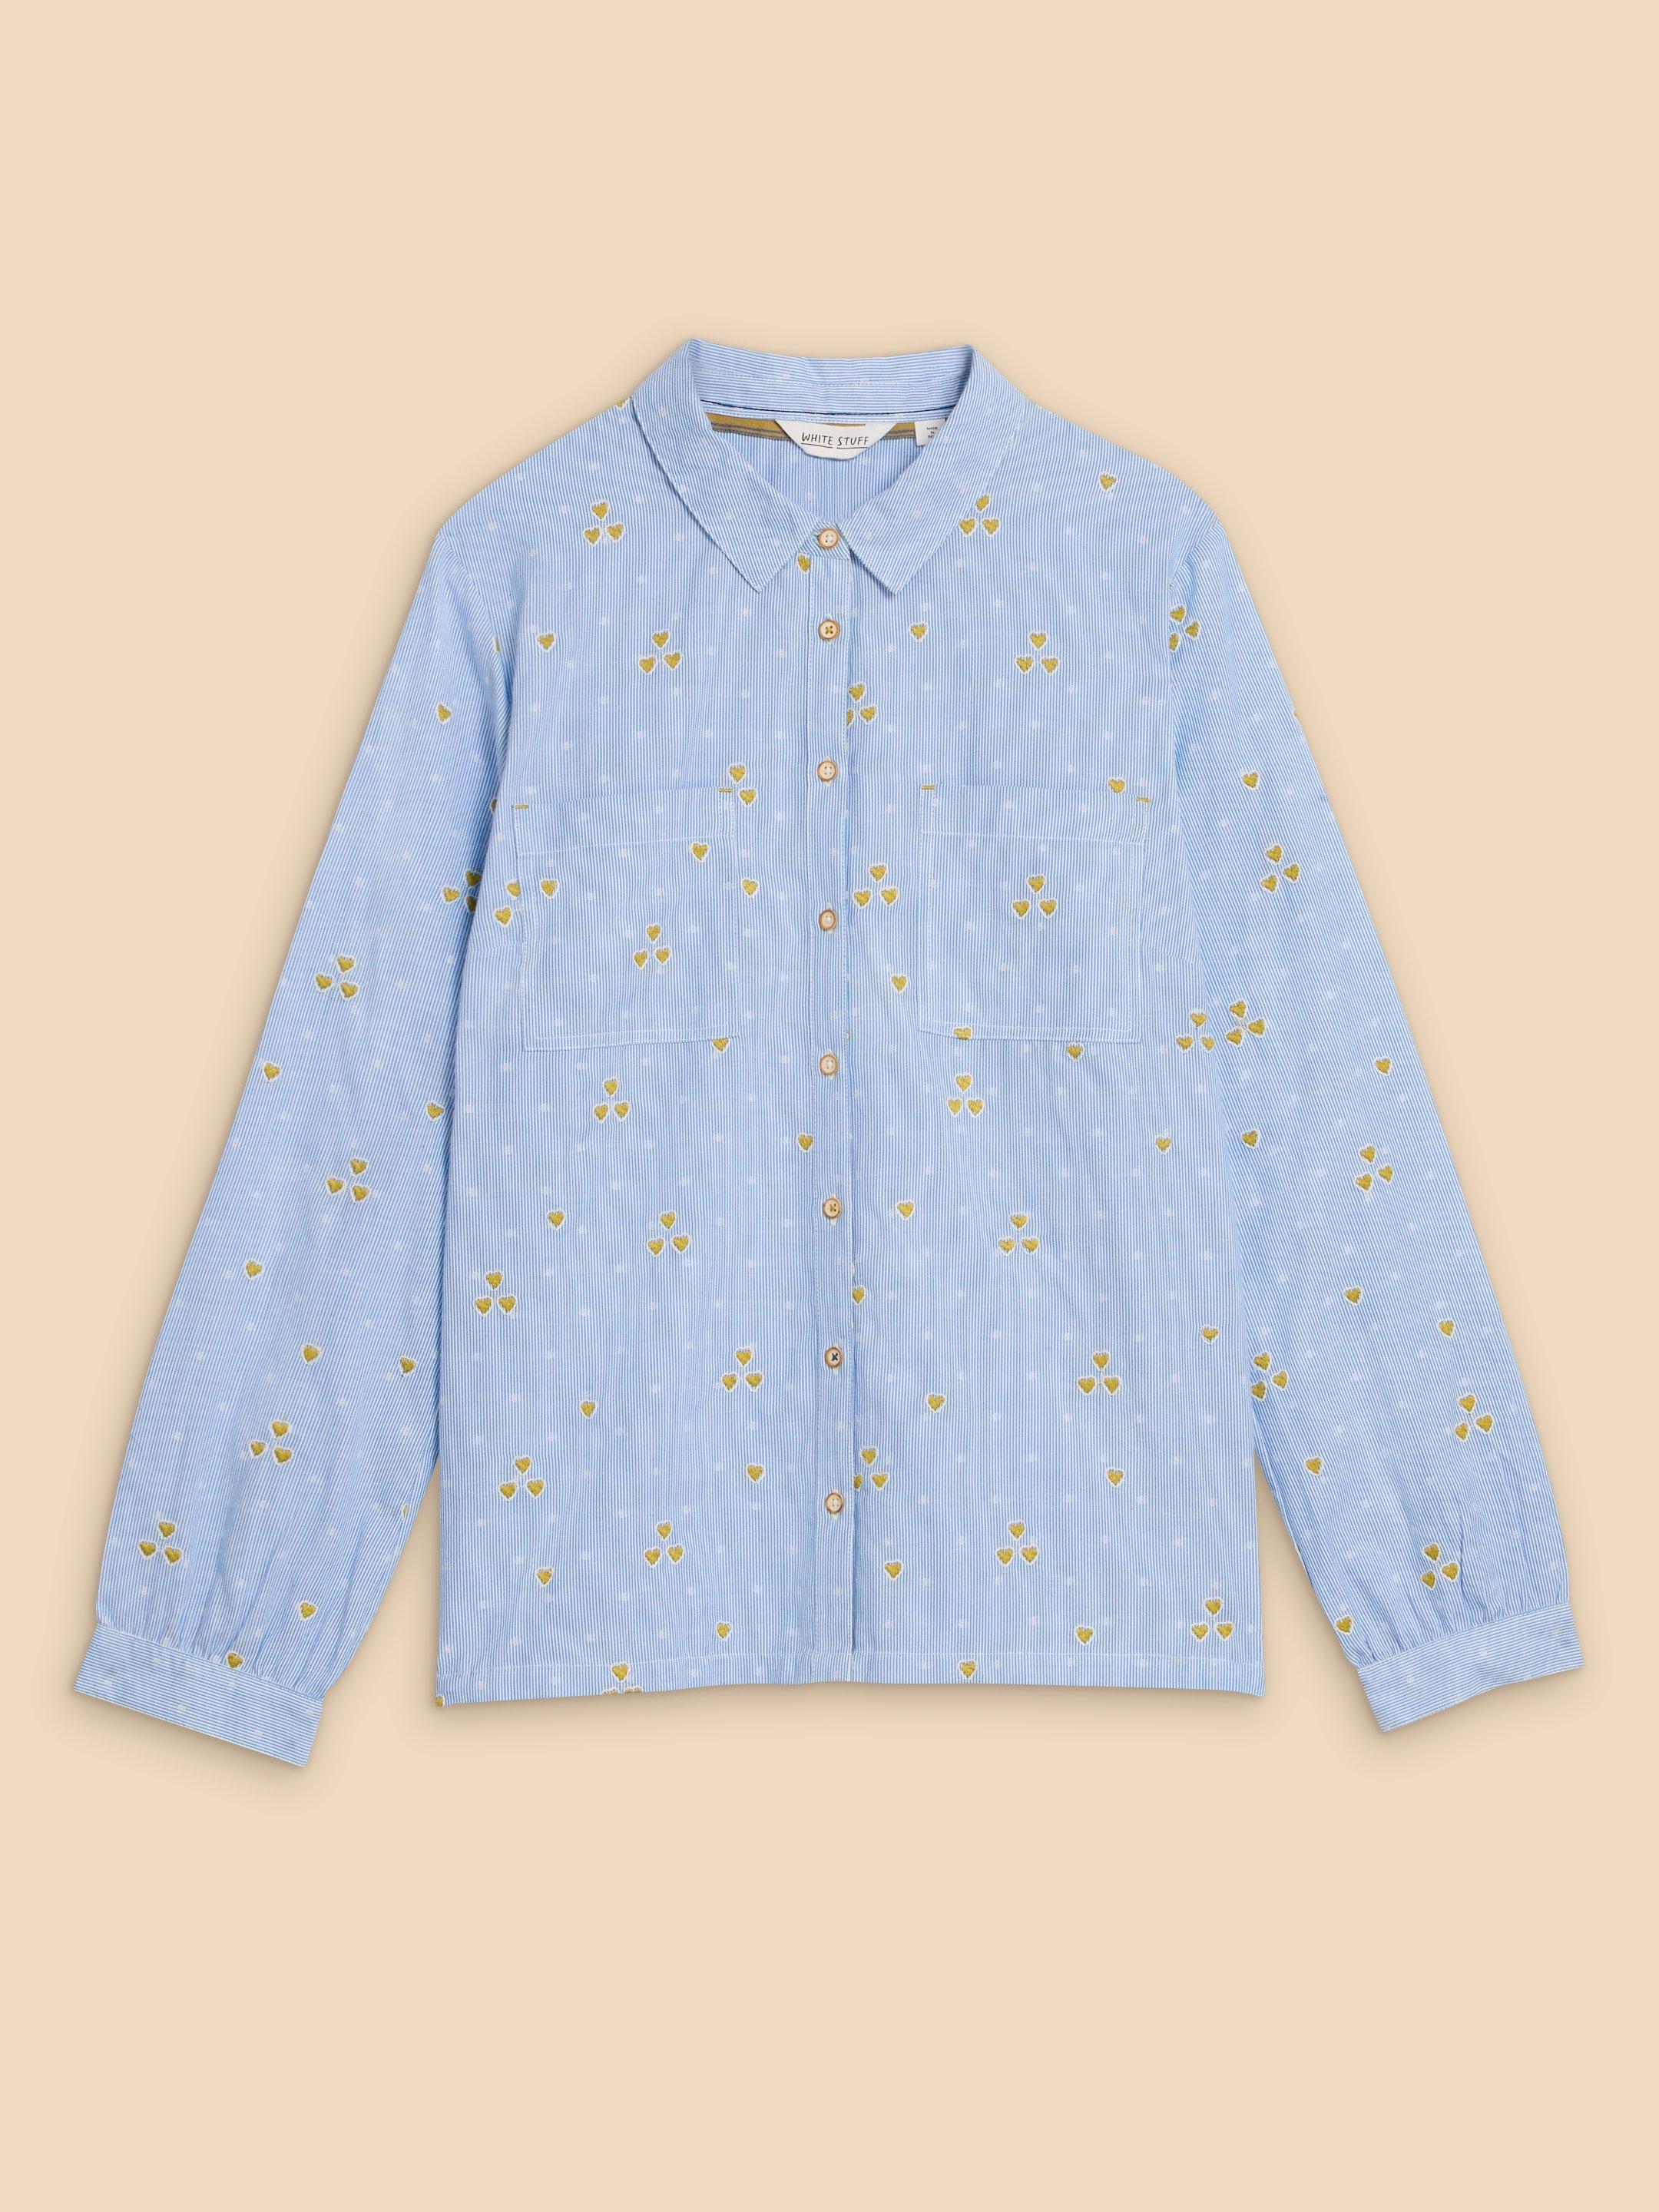 Sophie Heart Embroidered Shirt in BLUE MLT - FLAT FRONT